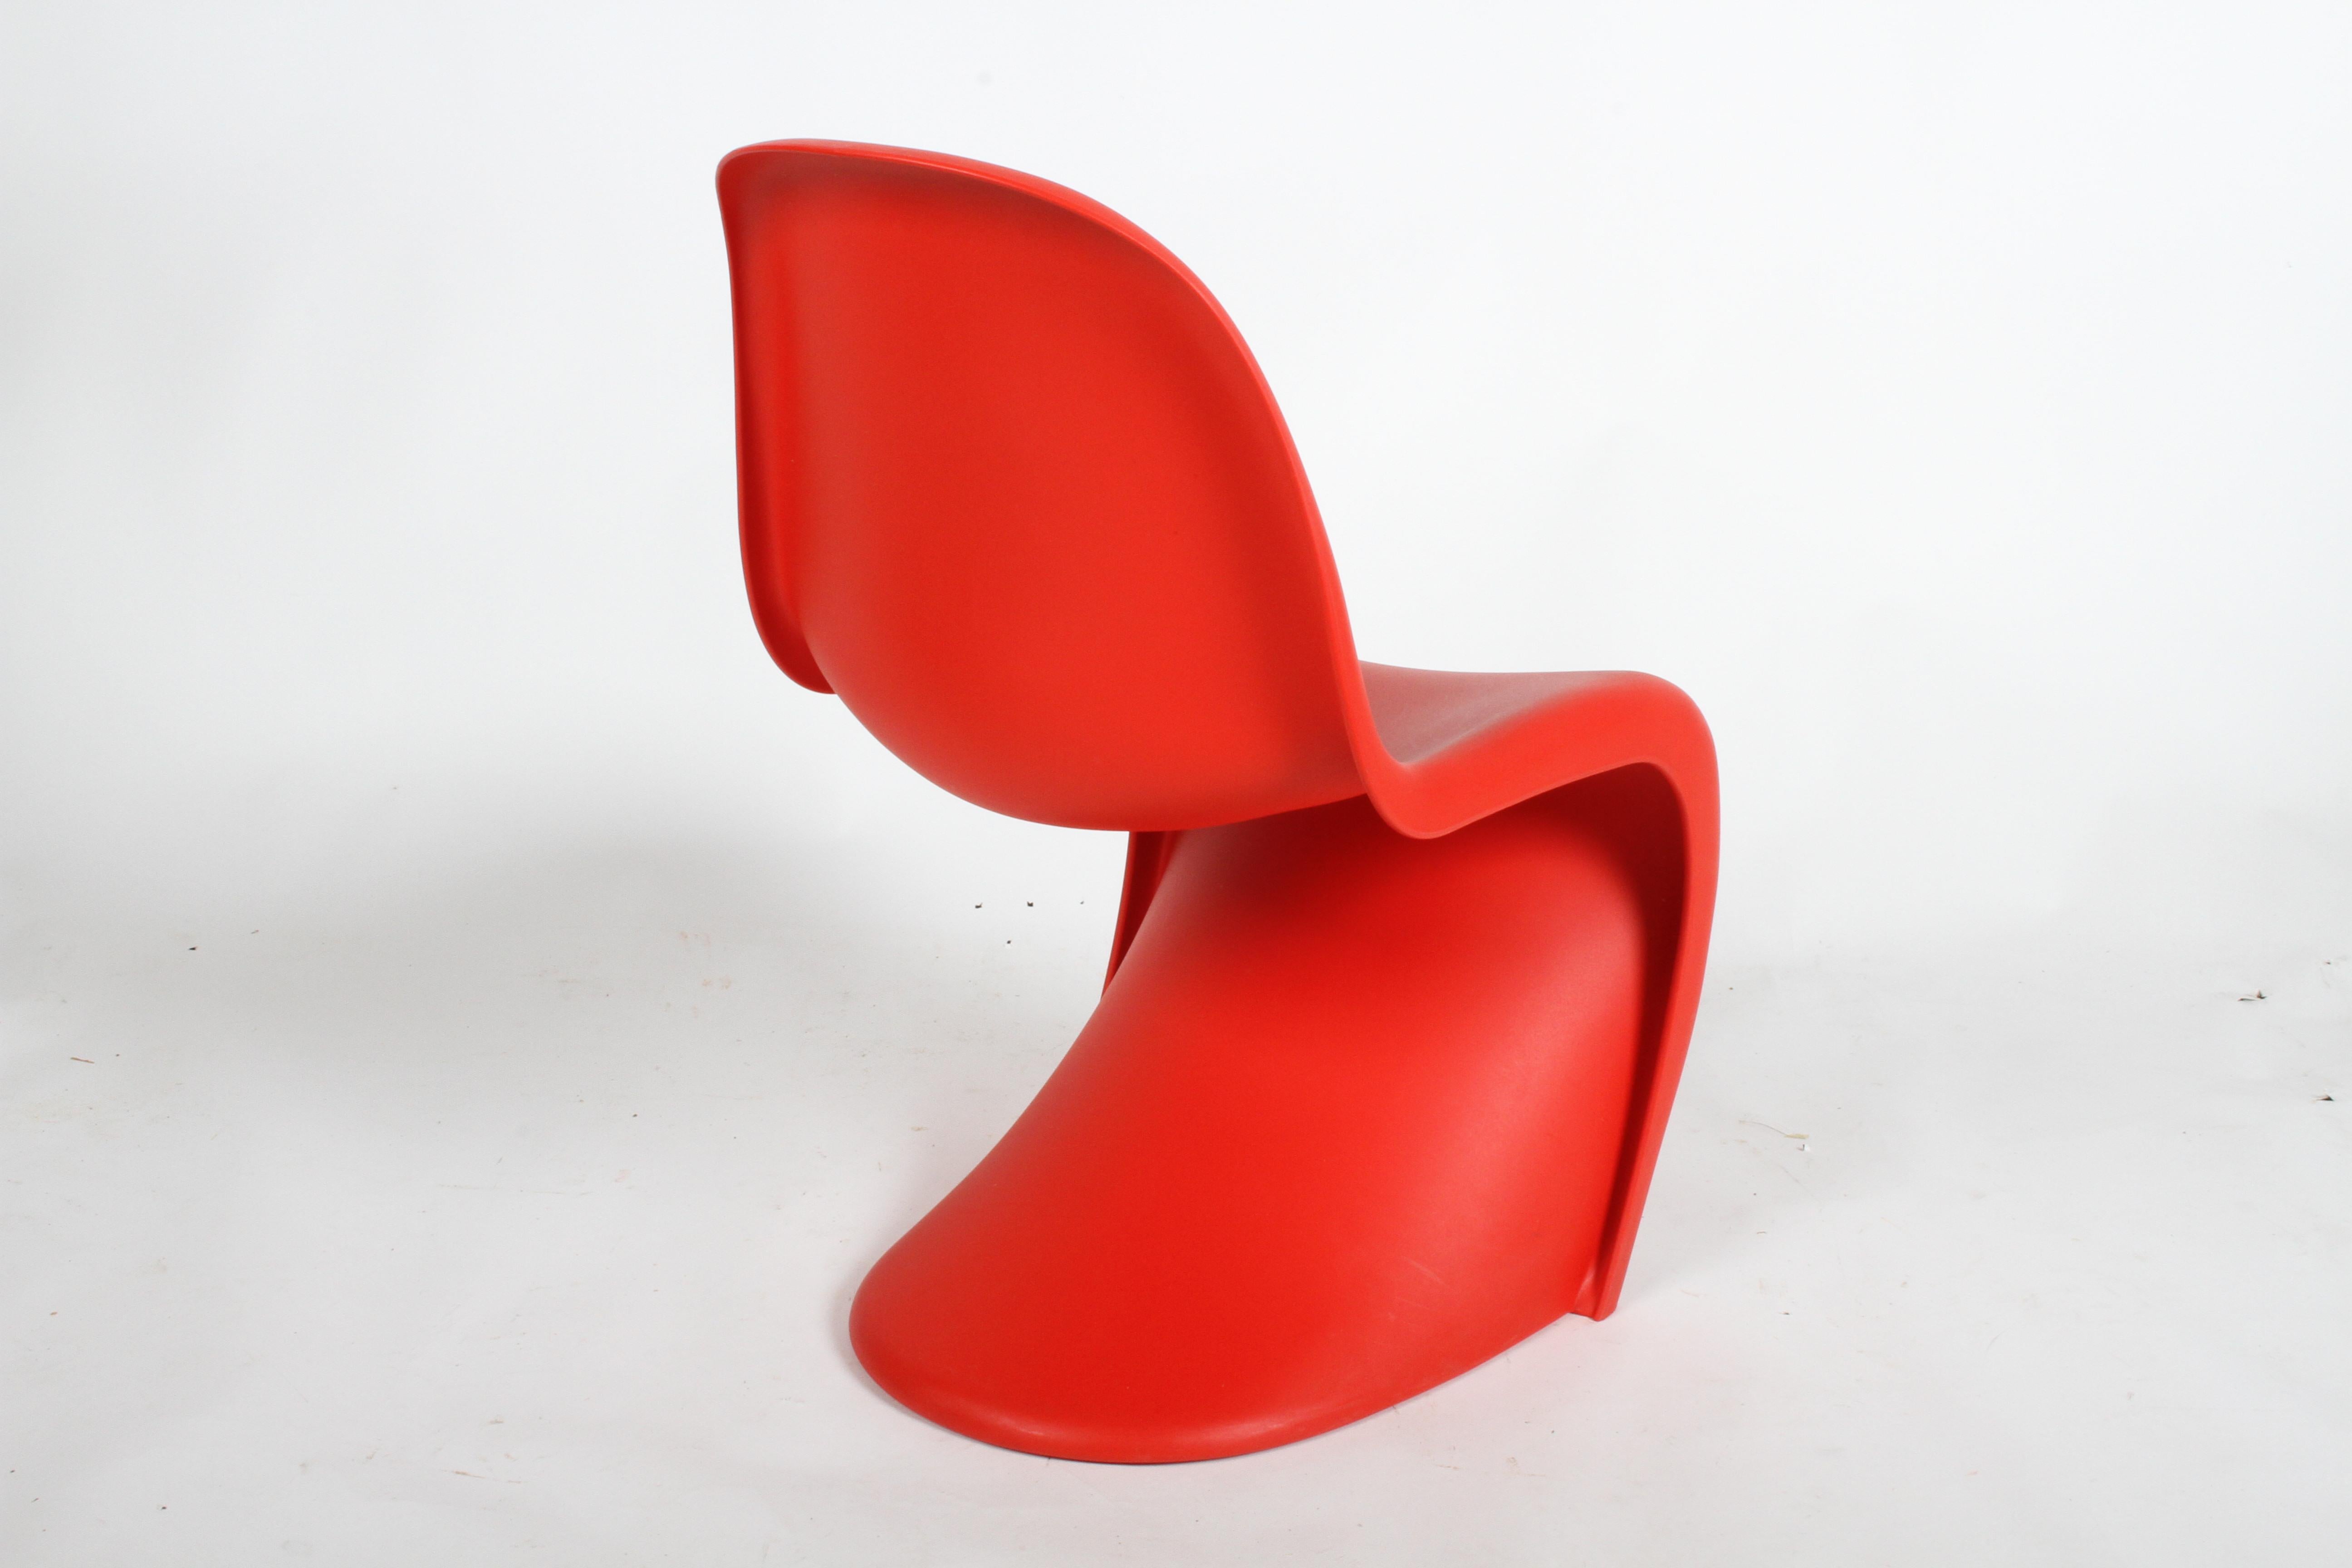 Molded Classic Mid-Century Modern Verner Panton Chair in Red, Vitra Production